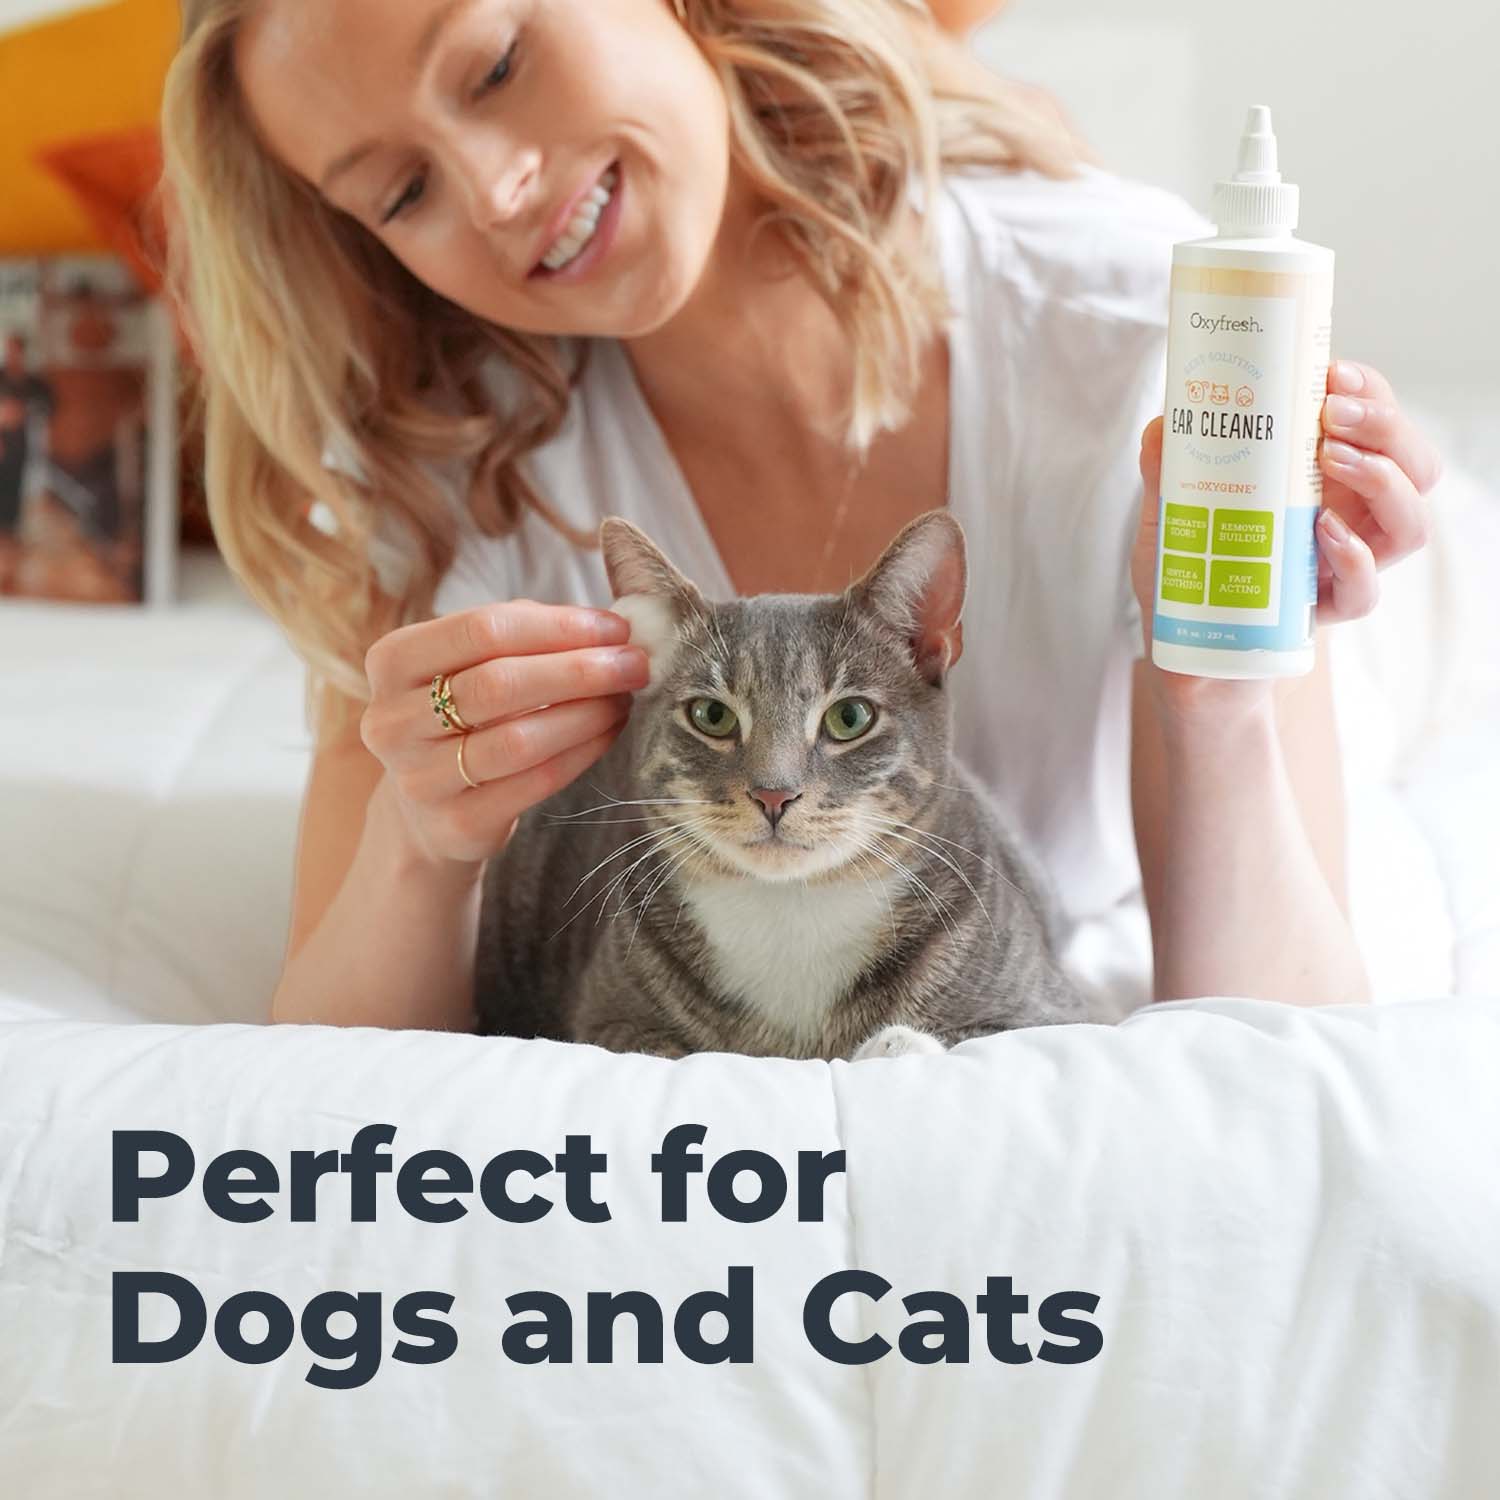 oxyfresh pet ear cleaner woman smiling using cat ear wash on a cotton ball for her cats ears with words that say perfect for dogs and cats